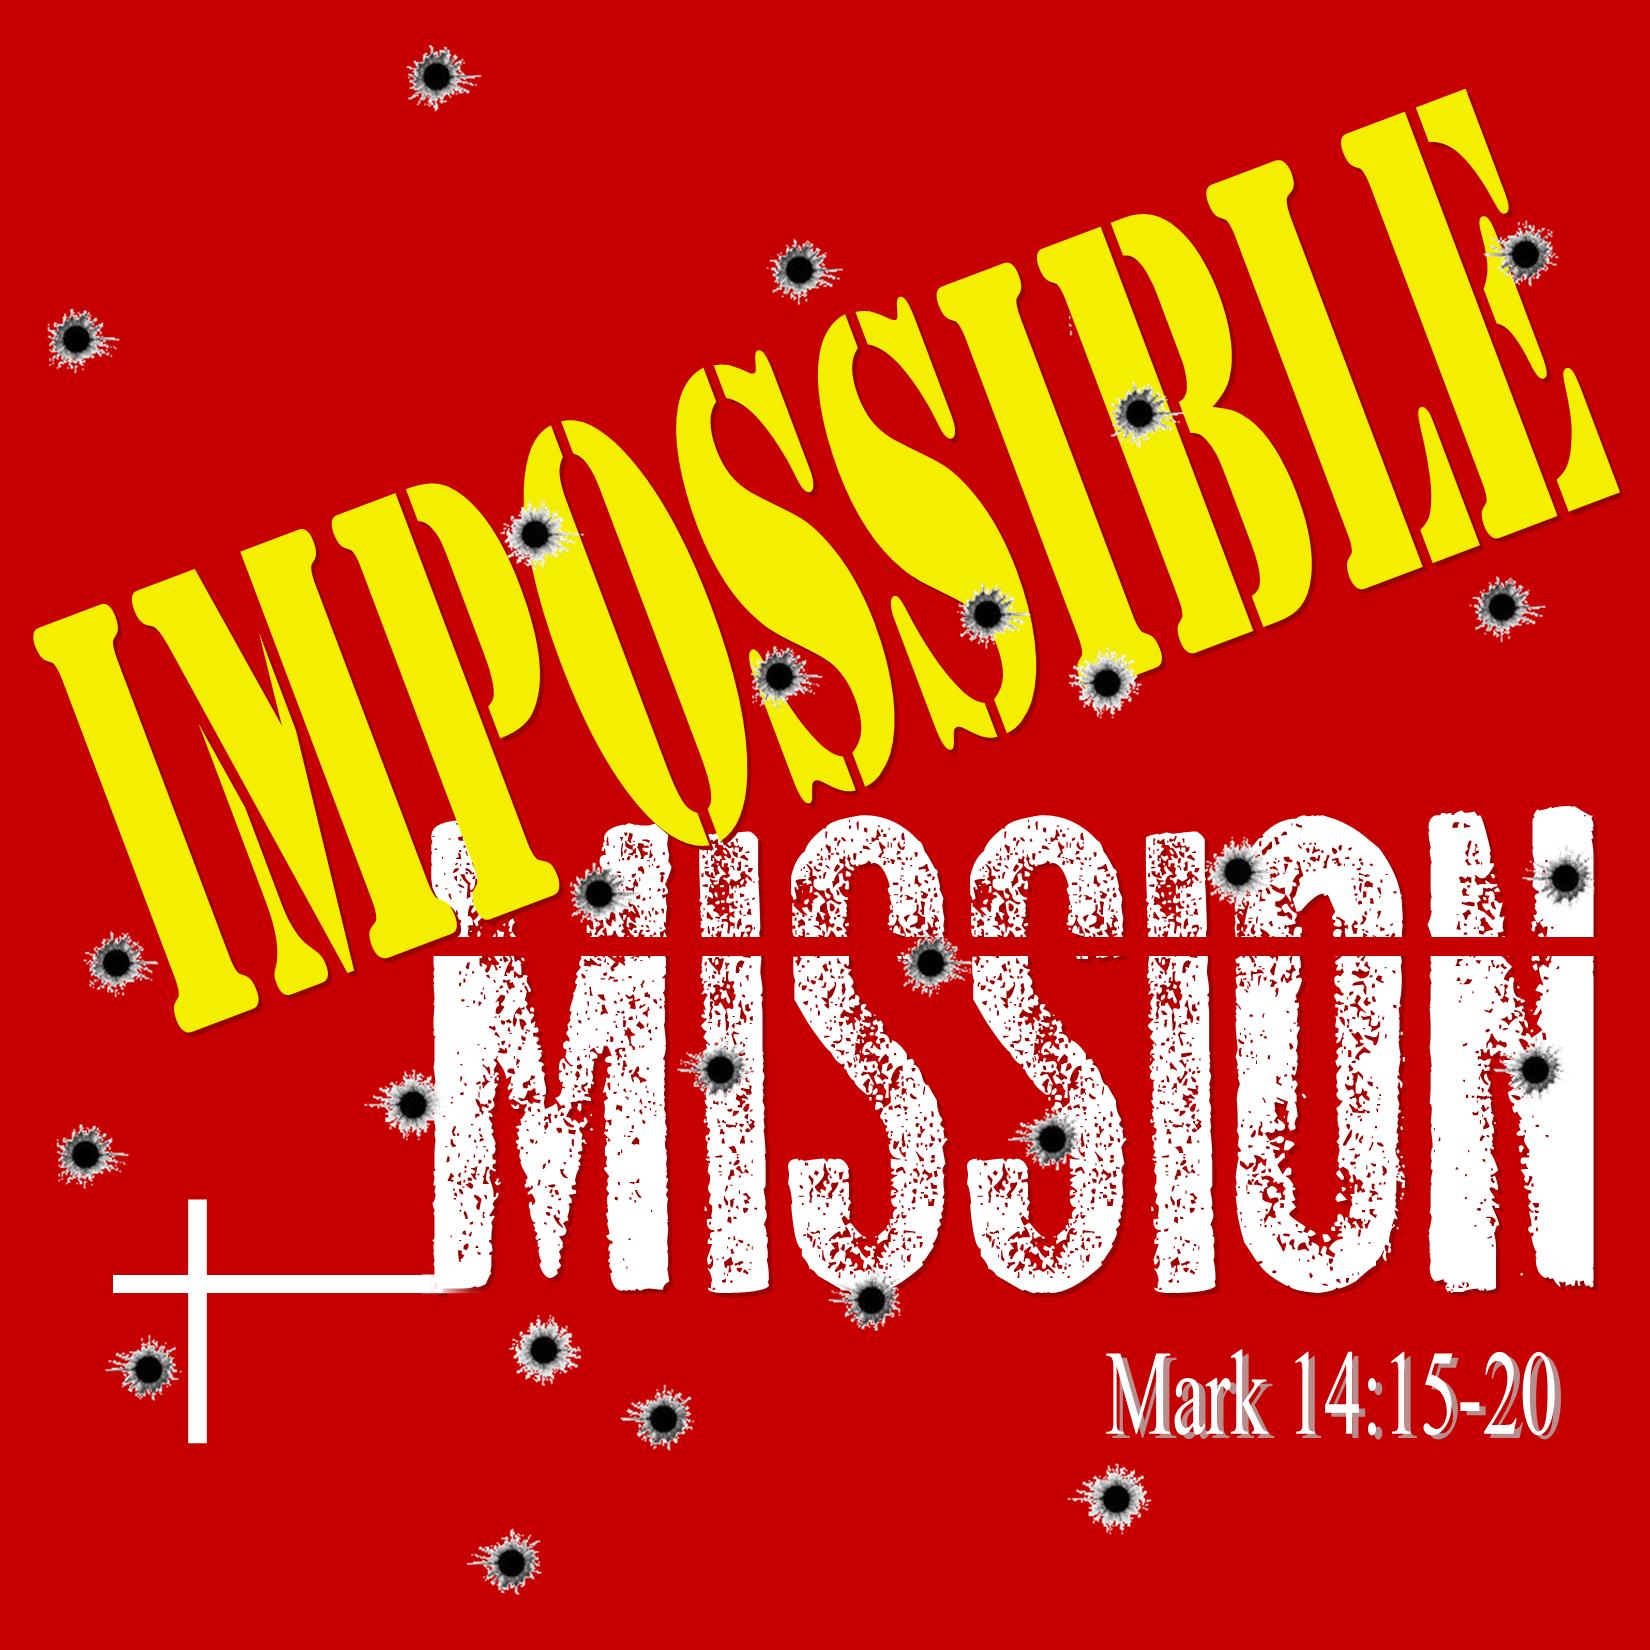 Impossible Mission - Mark 16:14-20